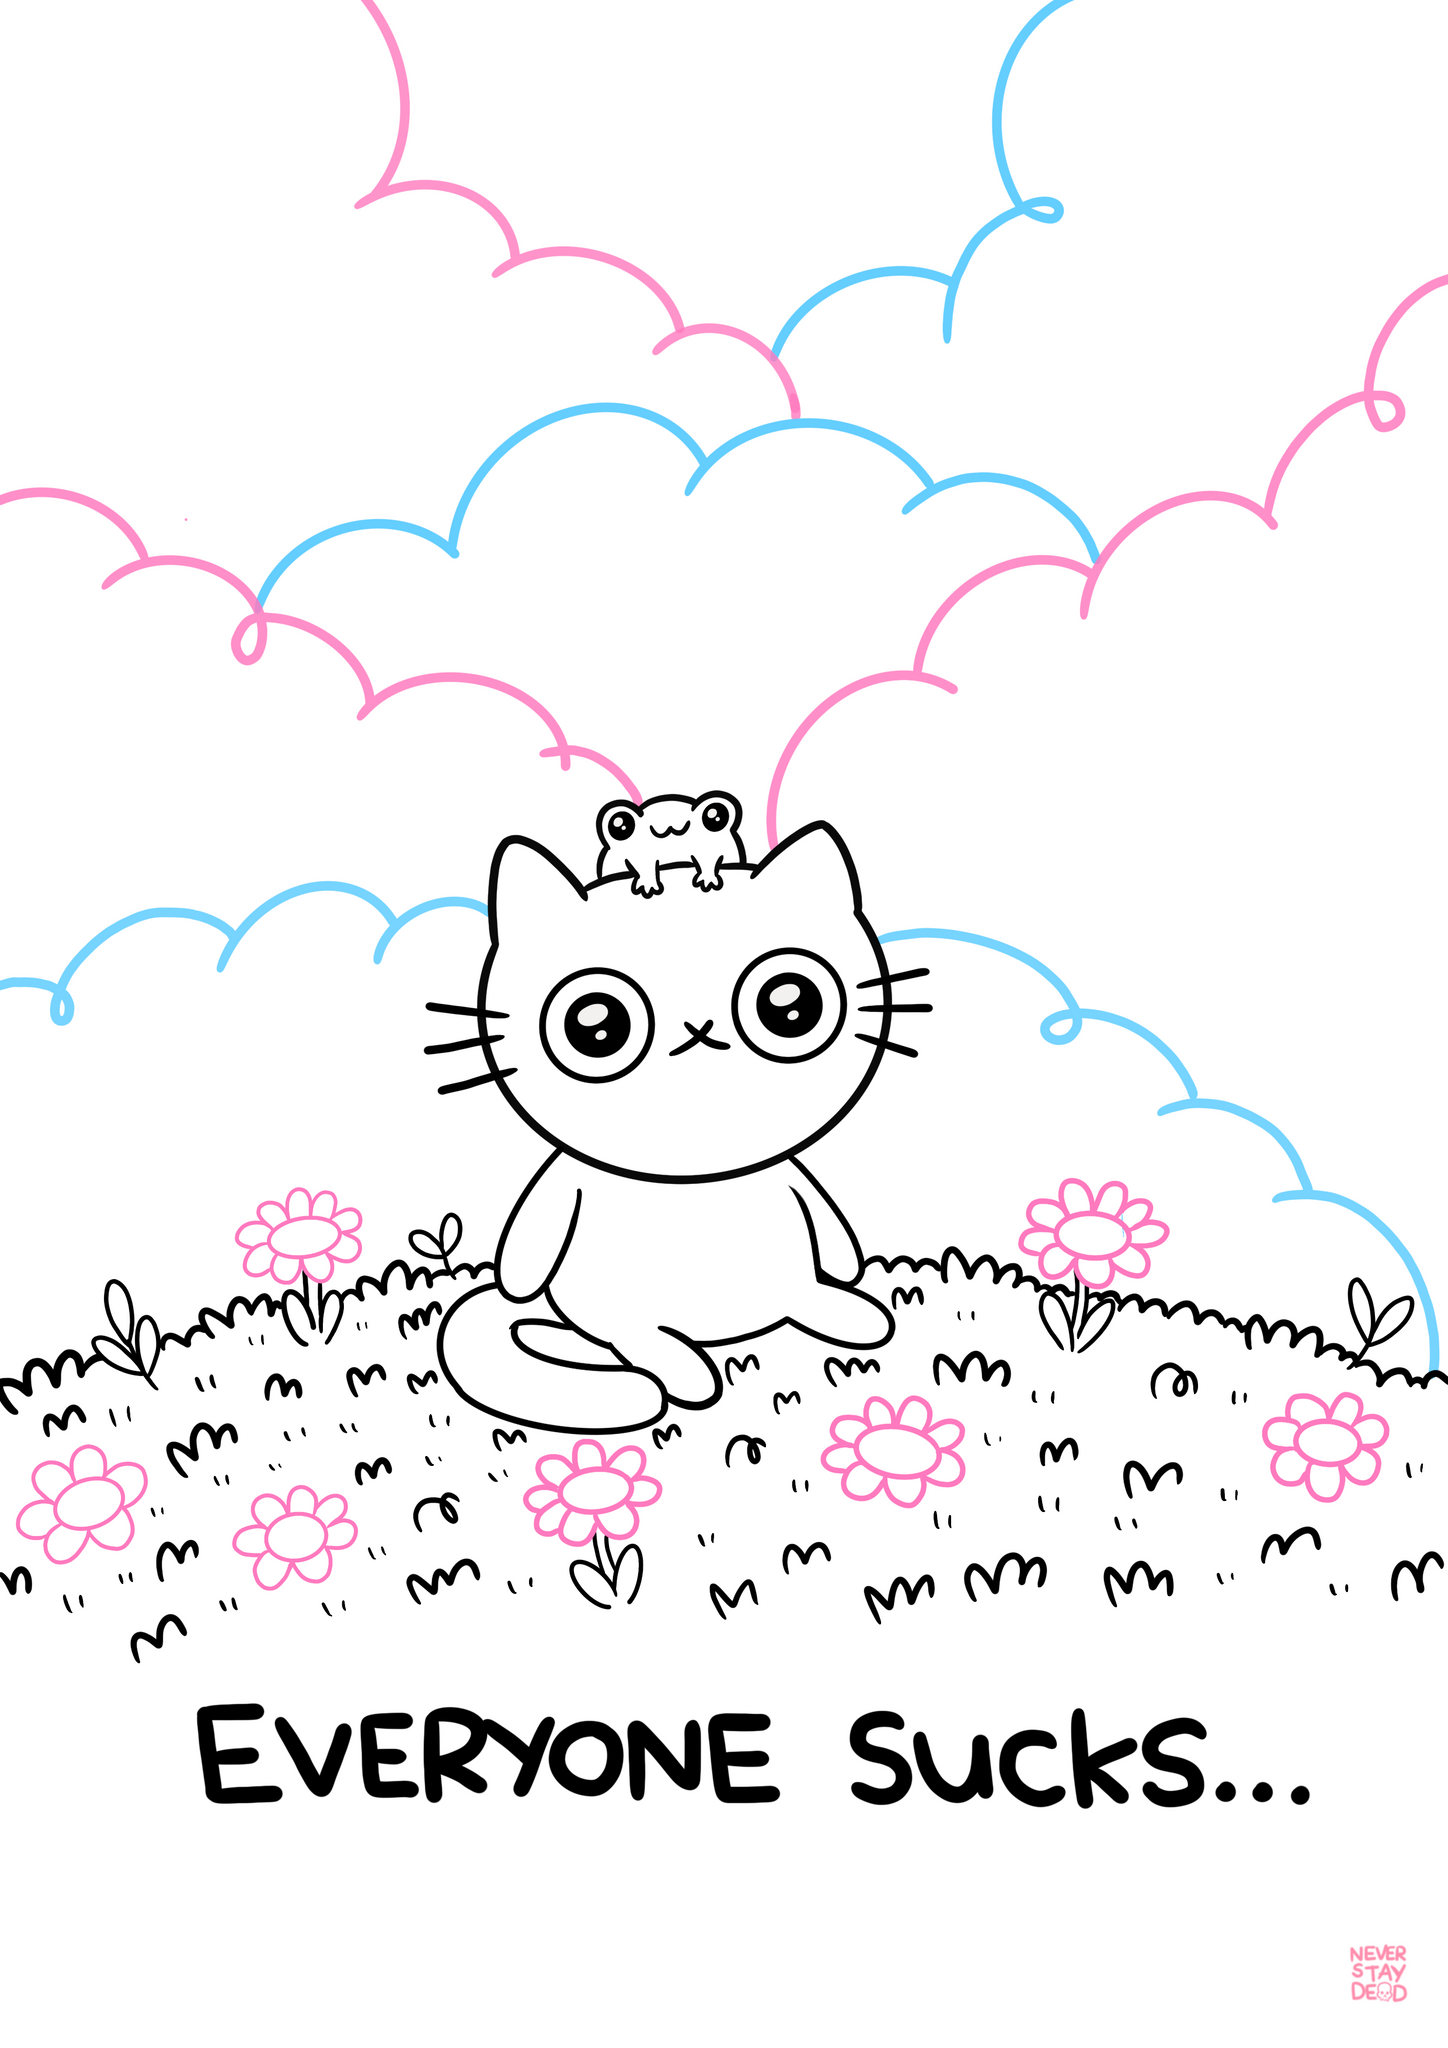 Pre-Order - ‘Awesome’ Colouring Book (Released March 8th)